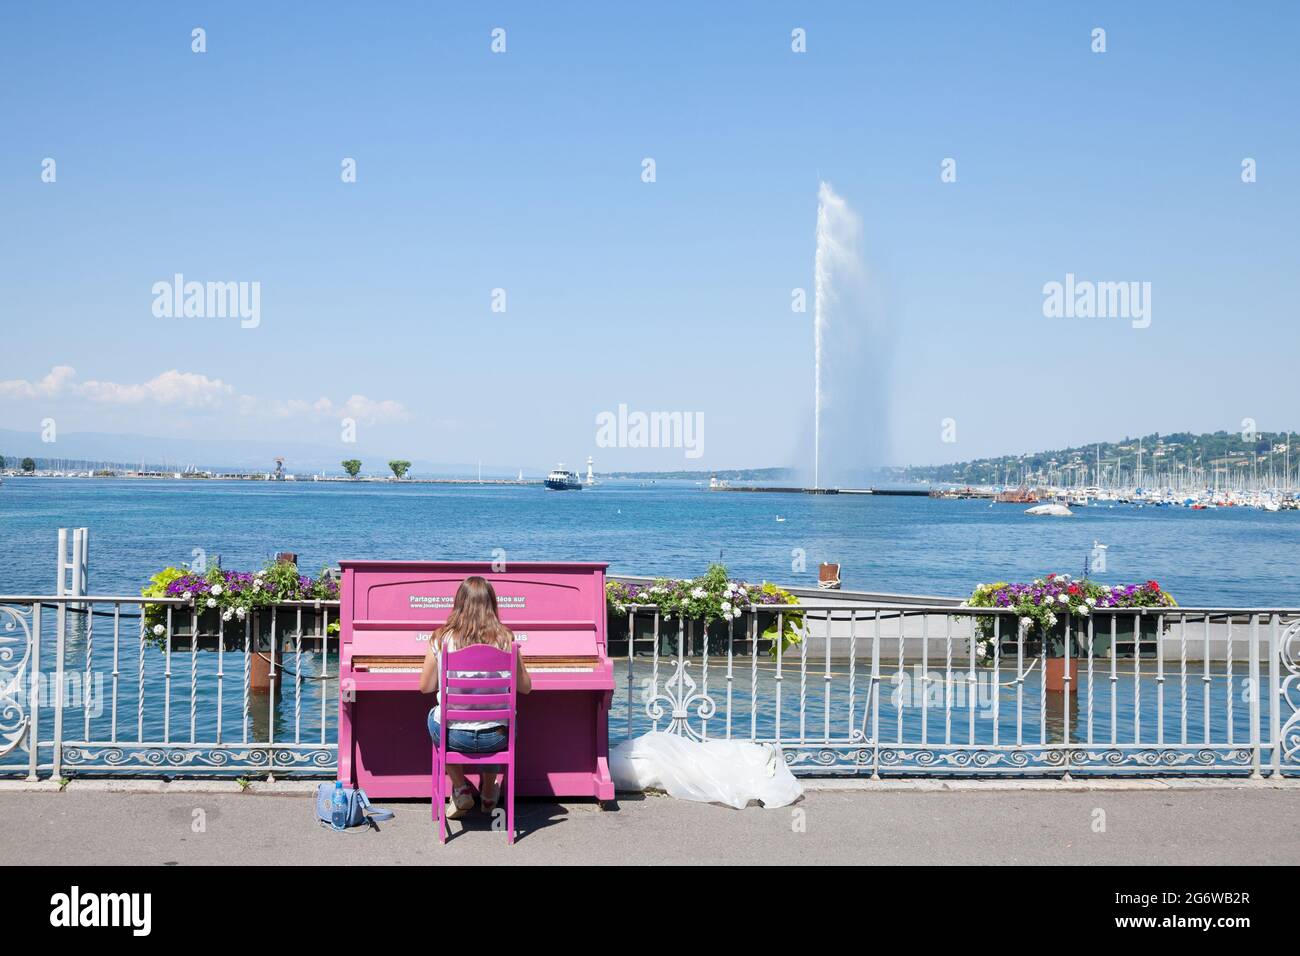 Picture of the Water Jet - Jet d'Eau of Geneva, Switzerland, one of the iconic places of the city, on Lake Geneva, also called Lac leman. The Jet d'Ea Stock Photo